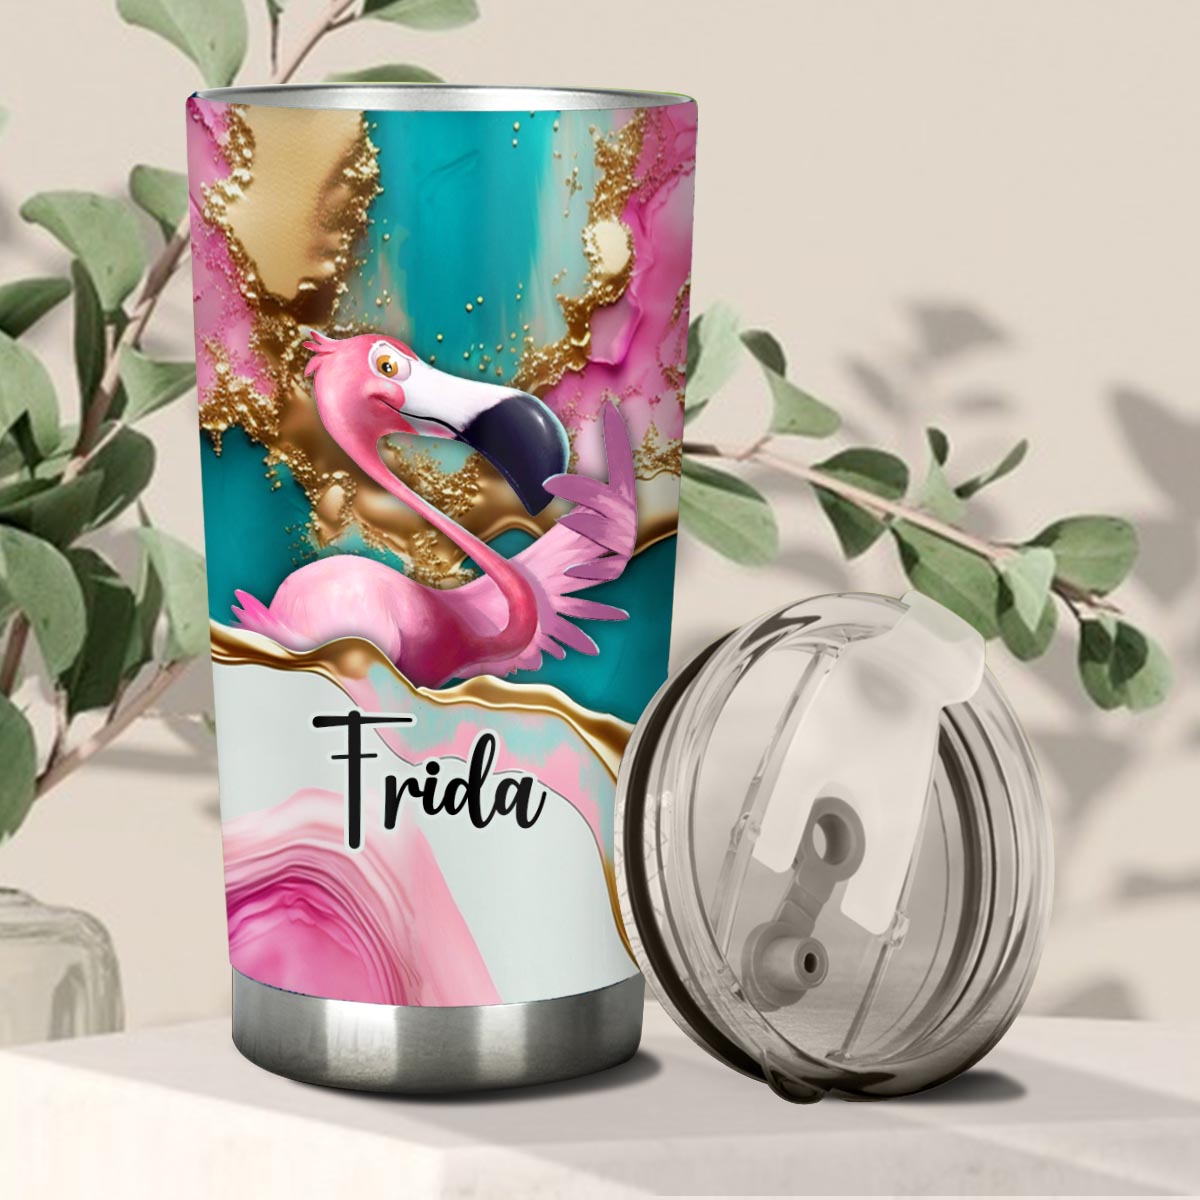 Please Take A Number - Personalized Flamingo Tumbler